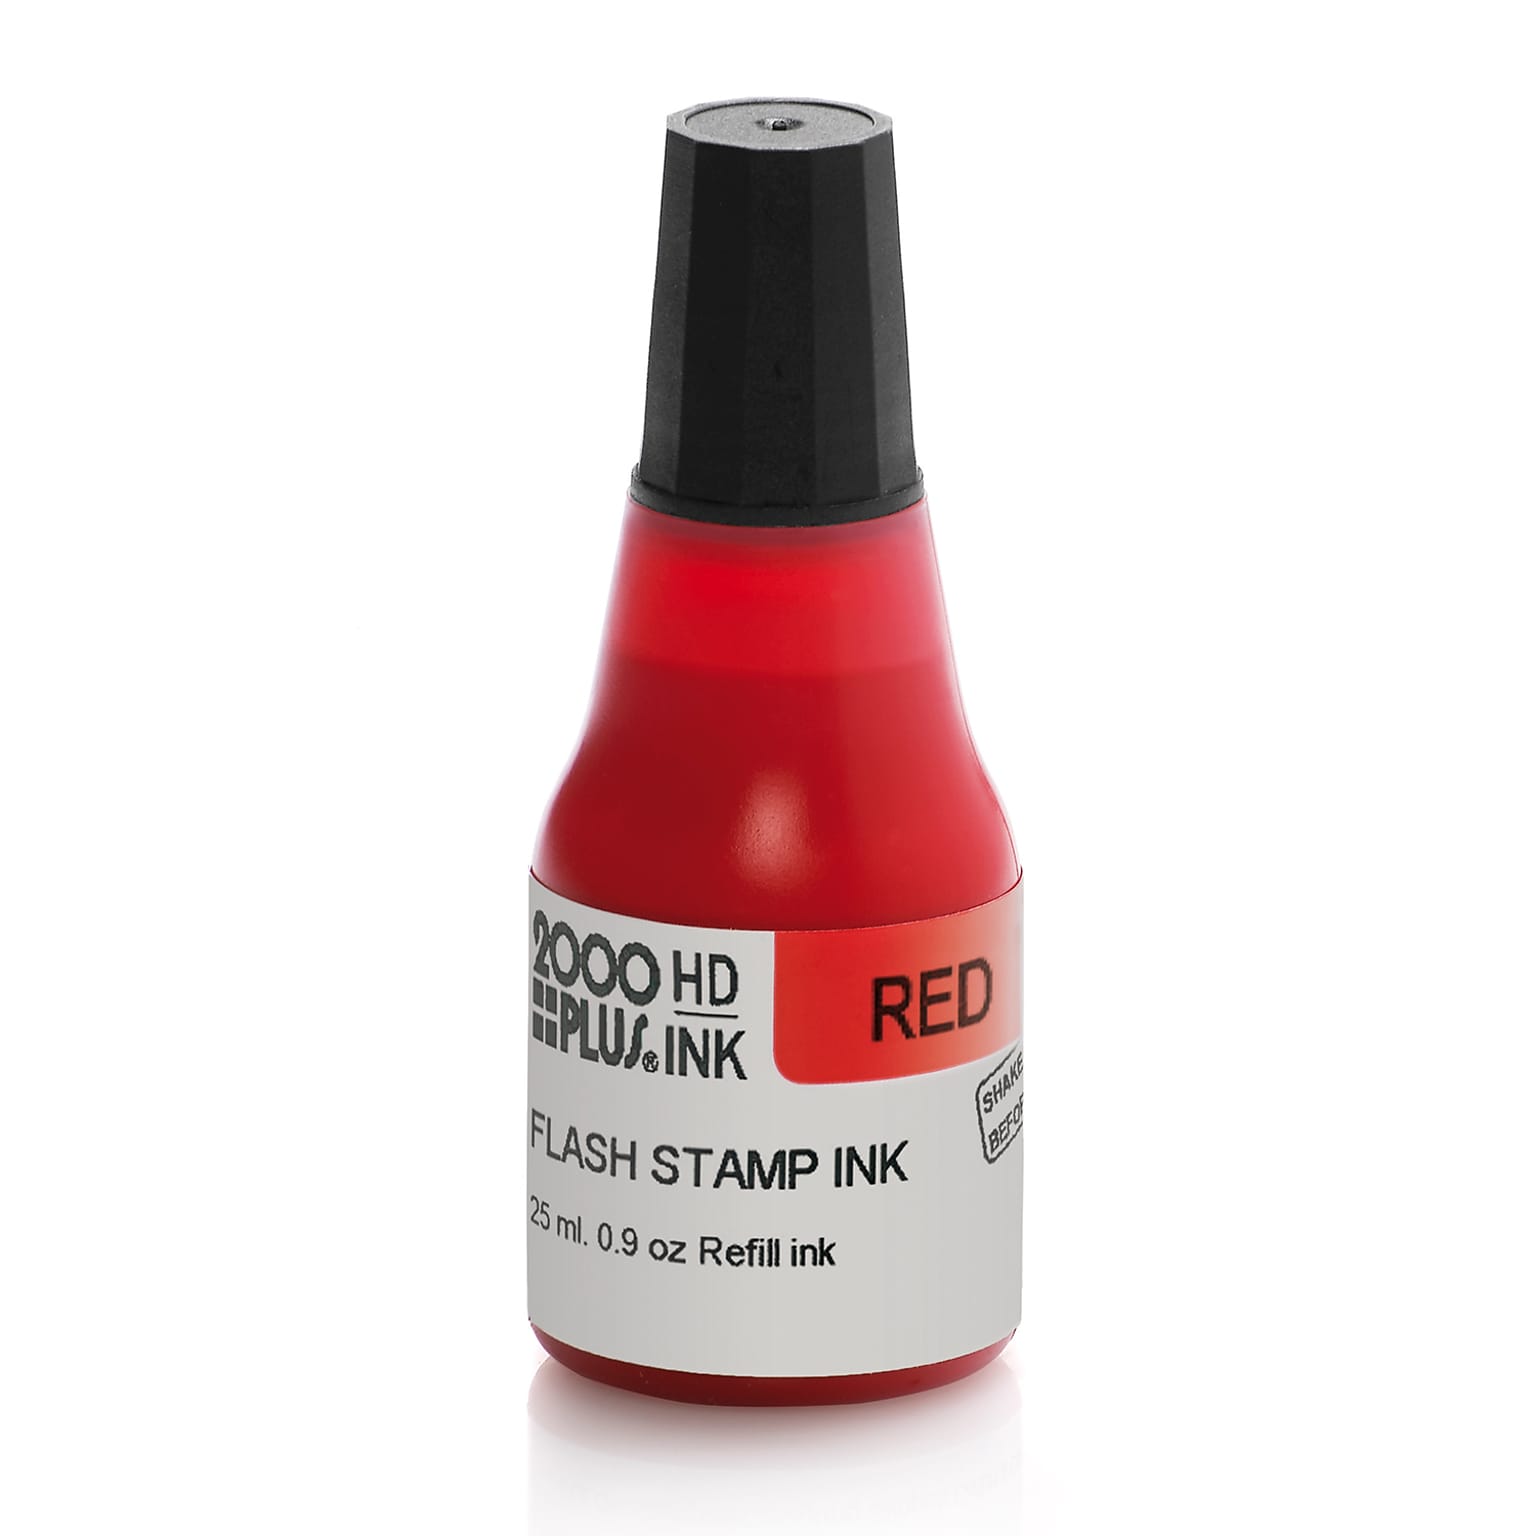 2000 Plus® HD Pre-Inked Stamp Refill Ink, Red, 0.9 fl. oz. Bottle